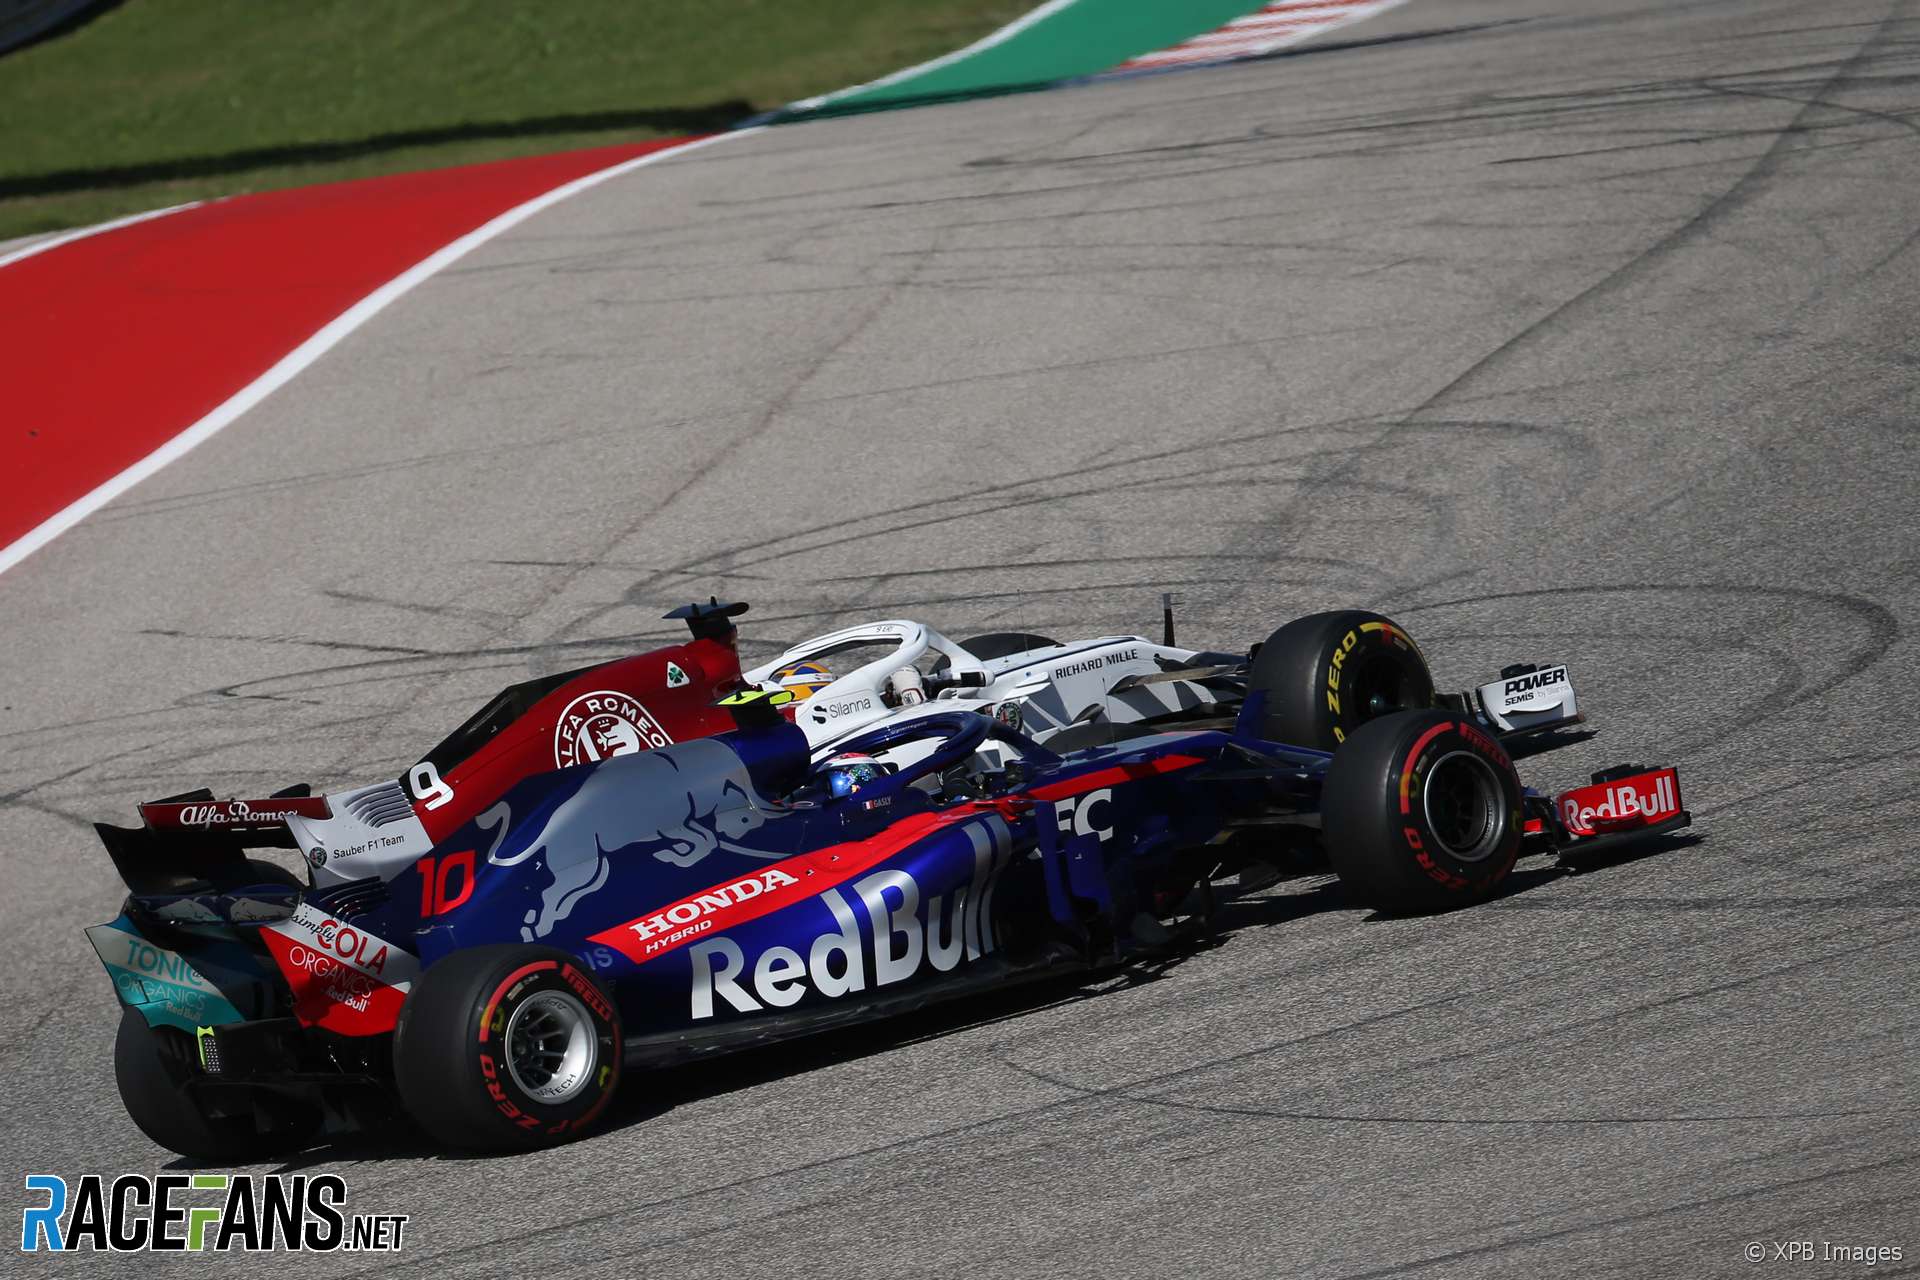 Pierre Gasly, Charles Leclerc, Circuit of the Americas, 2018